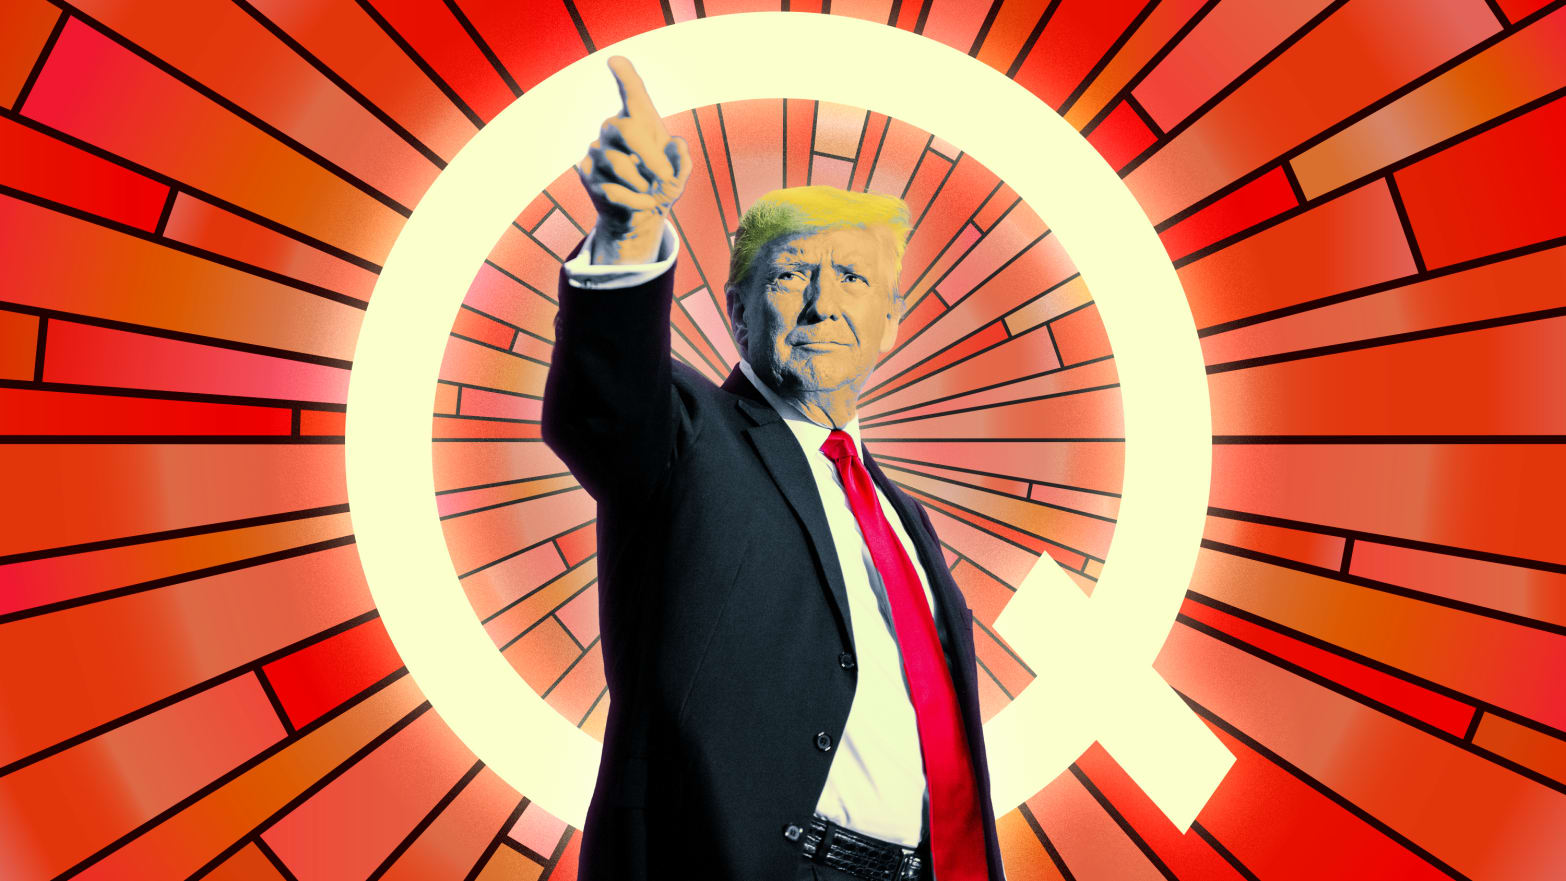 A photo illustration of former President Donald Trump and stained glass Qanon symbol.